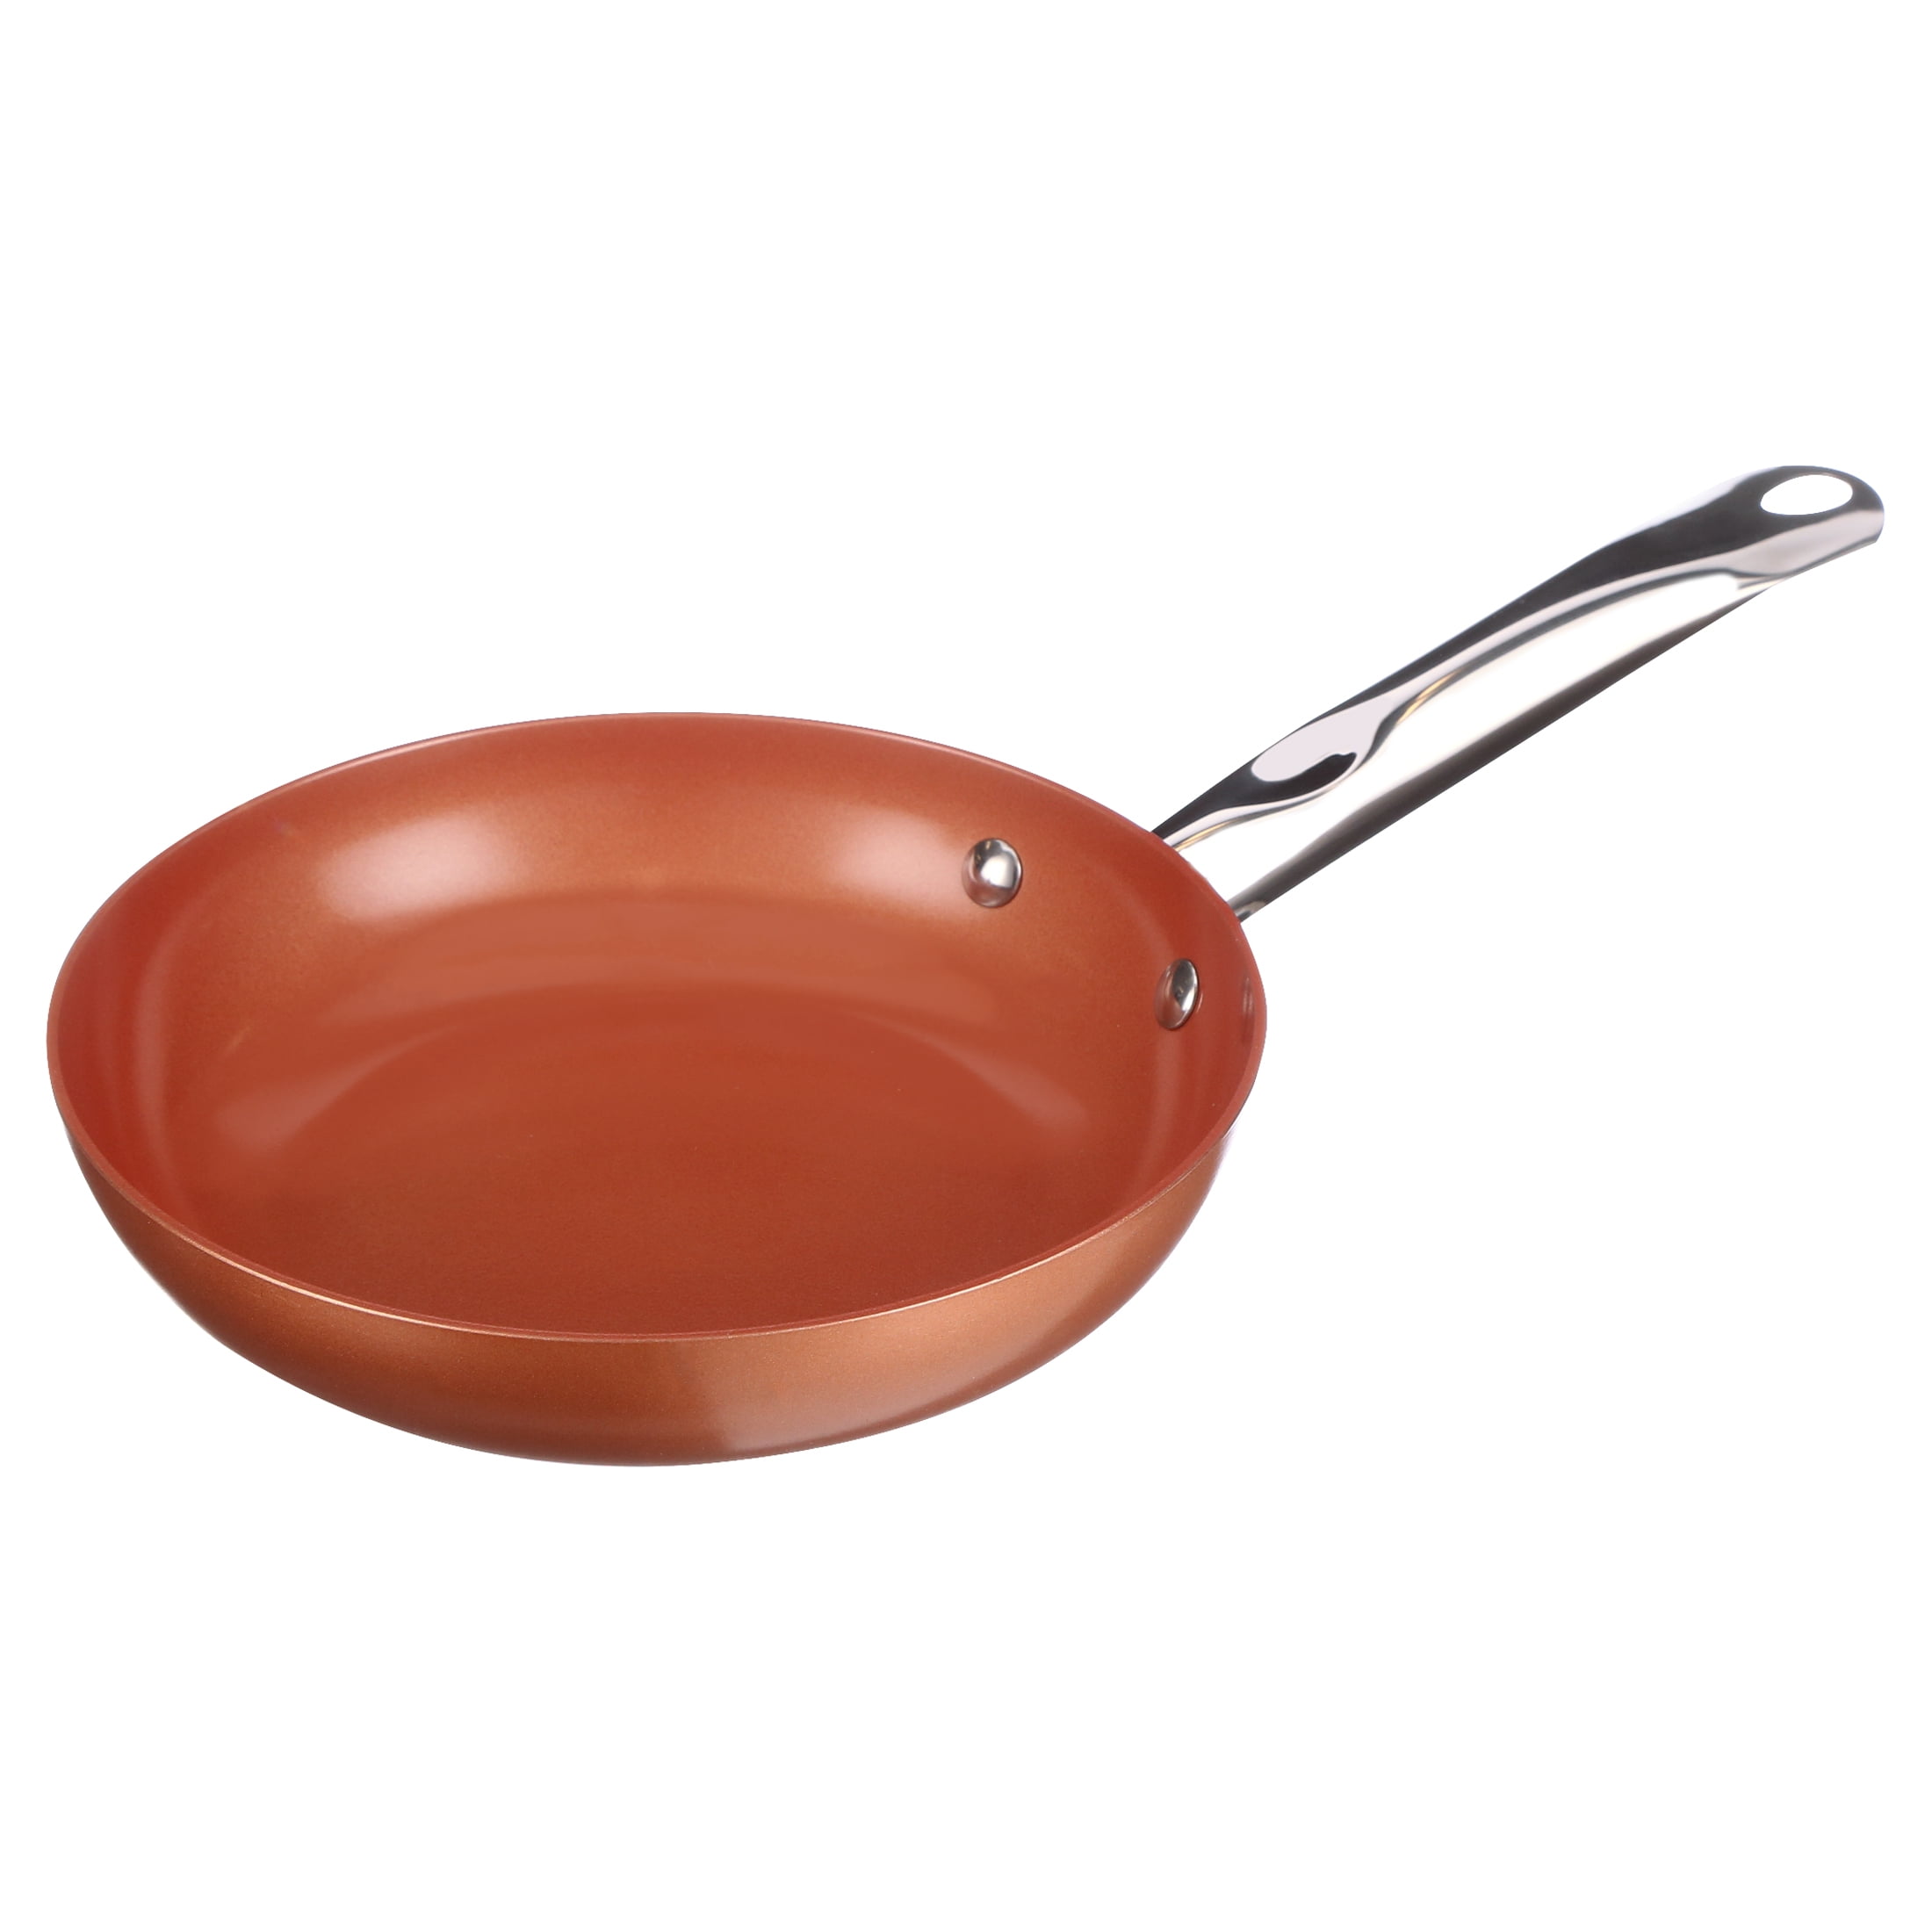 Copper Chef A-00438-19 8 8 Round Fry Pan, 8